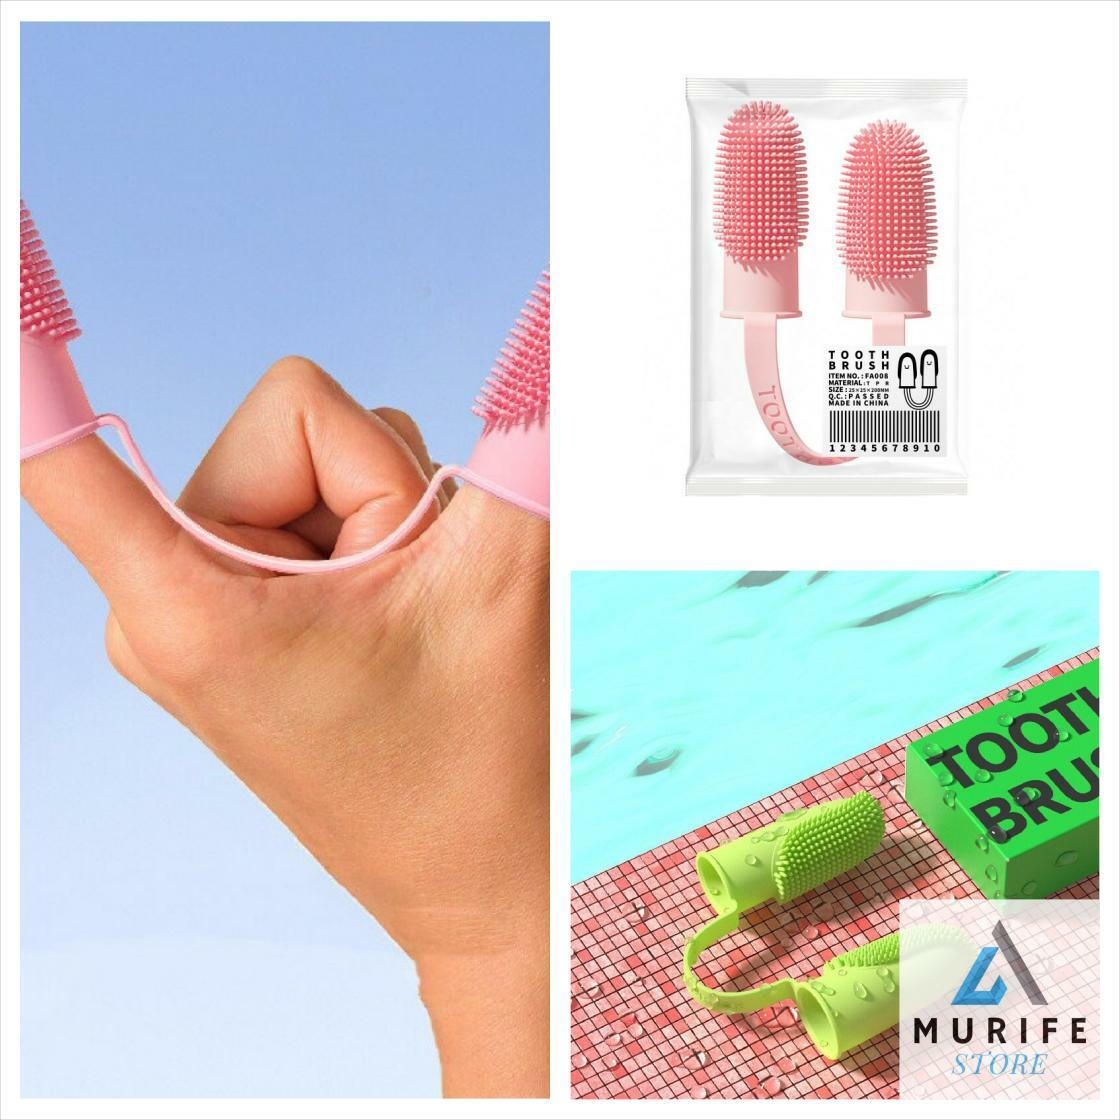 Just in! This unique Pet Products Tooth Cleaning Finger Set for €20.00. 
etsy.com/listing/142032…
#S #BambooToothbrush